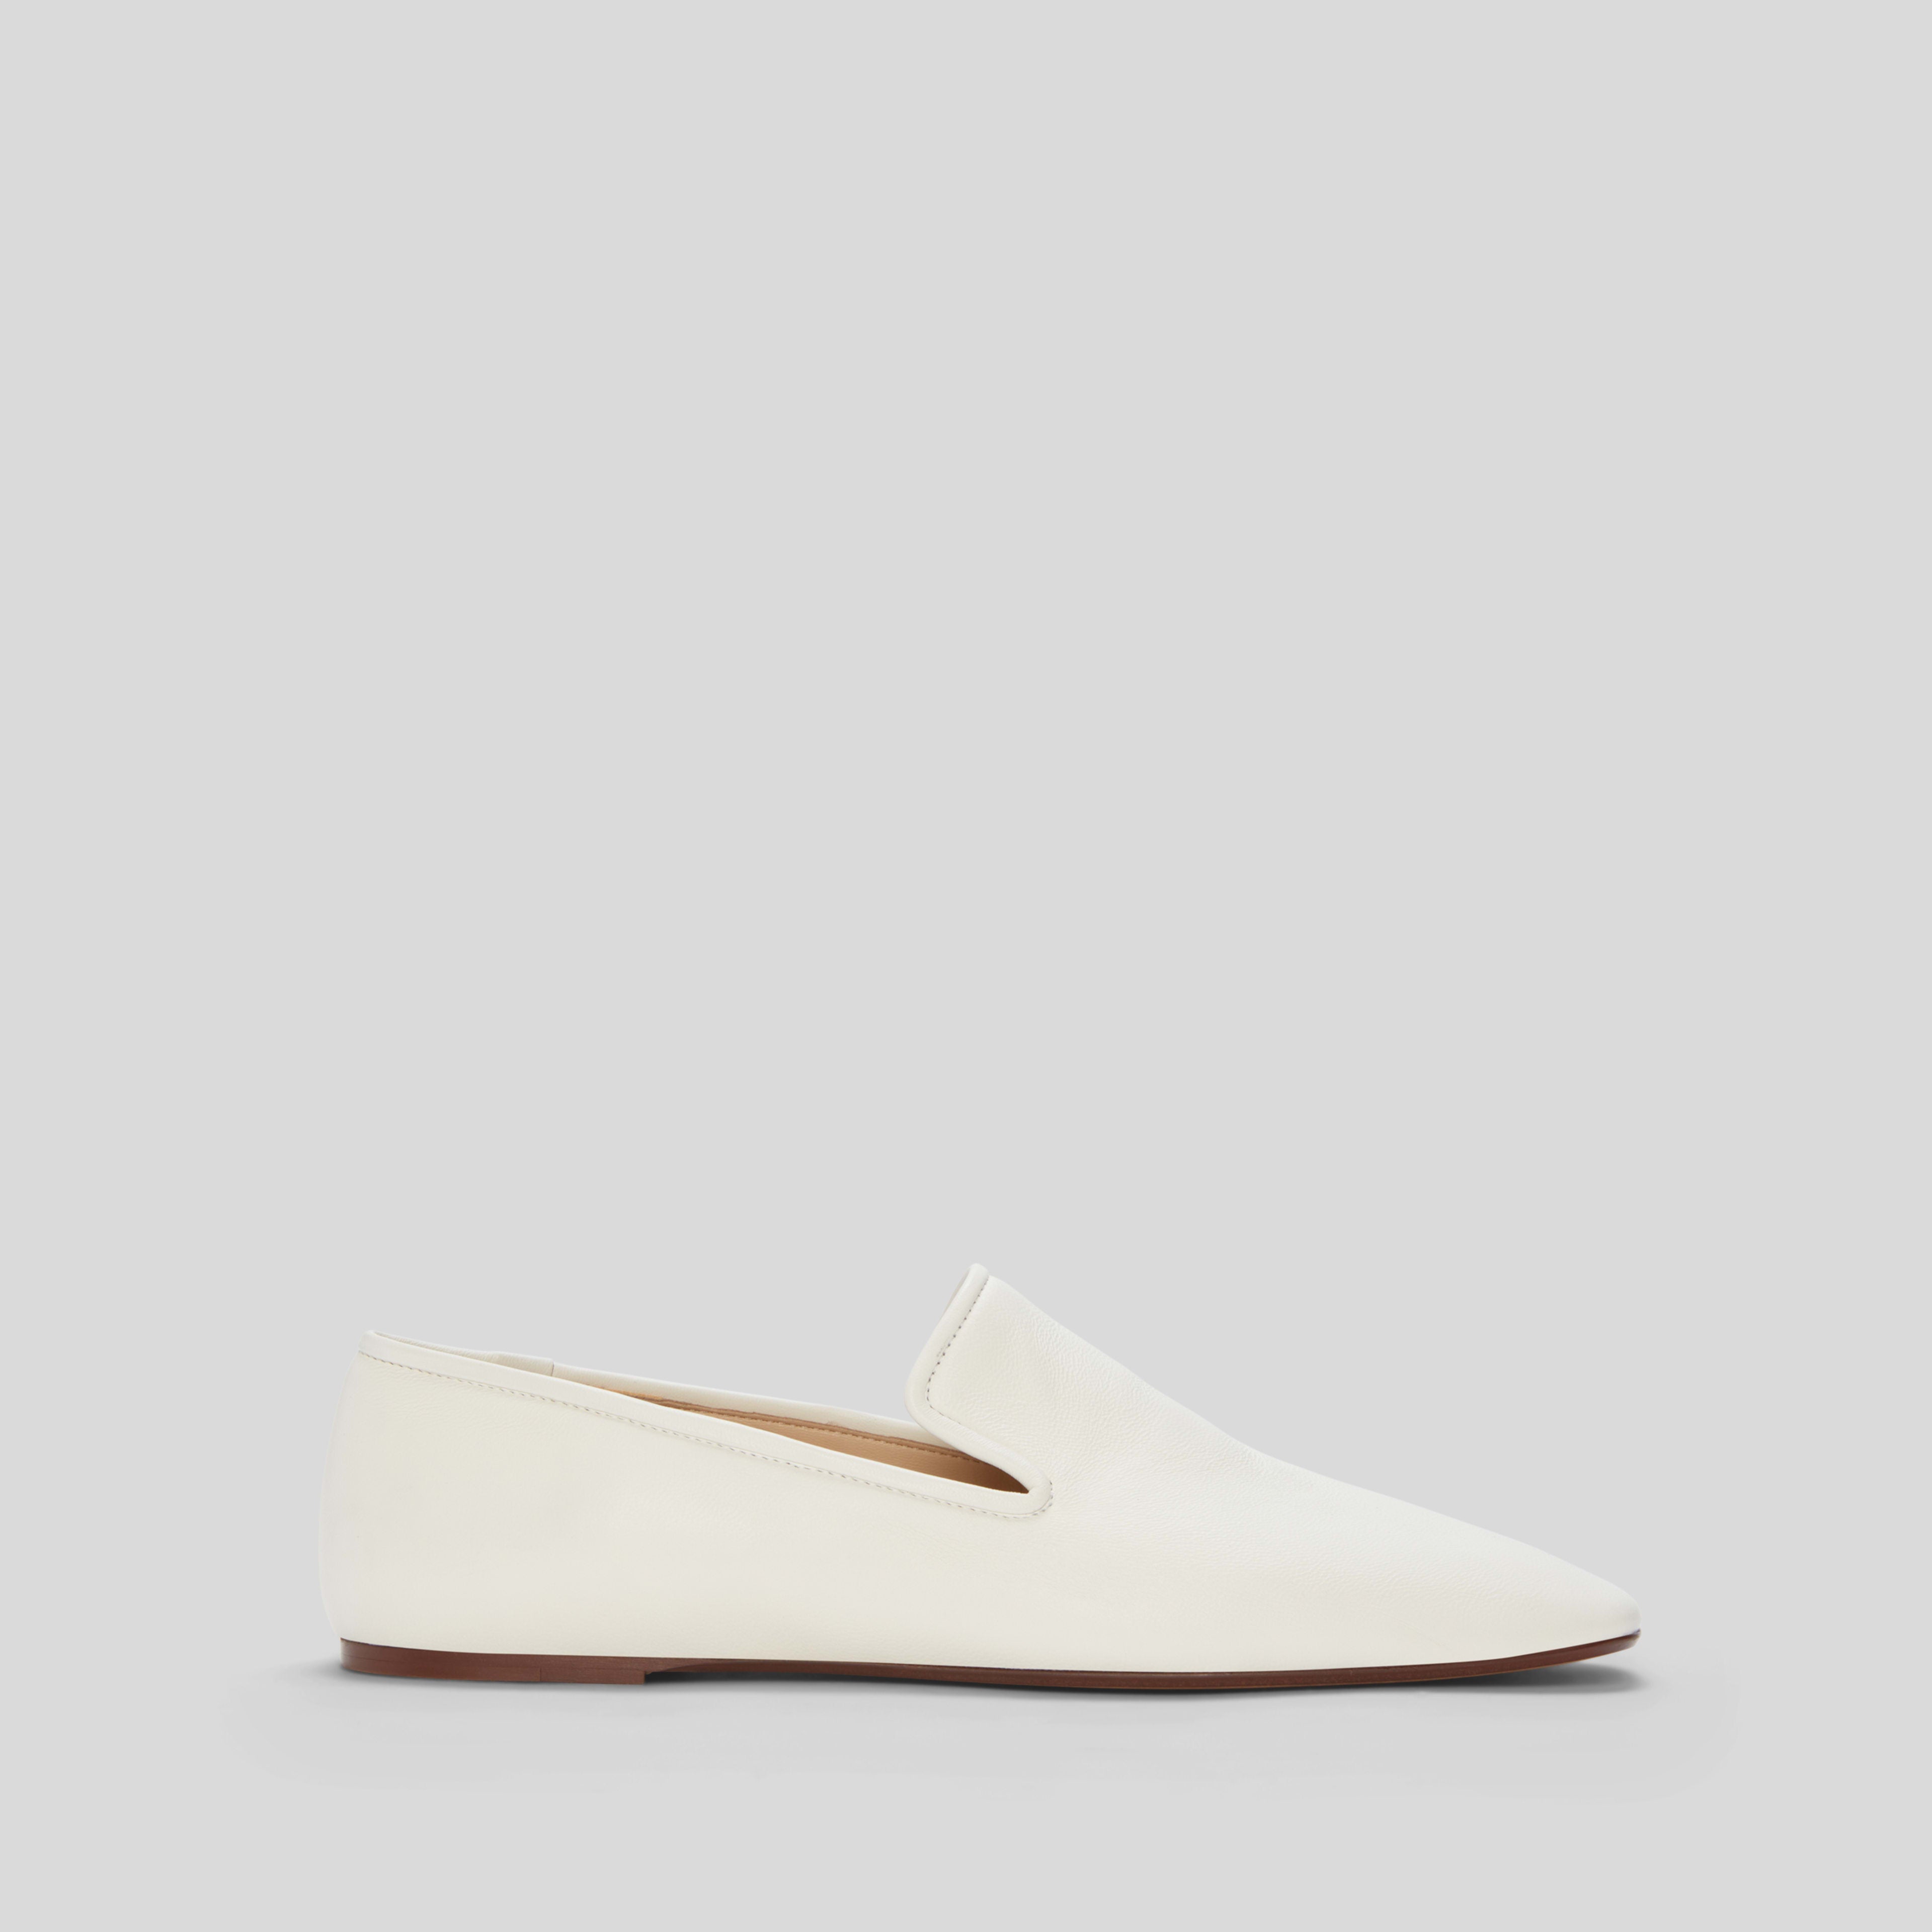 Everlane + The Italian Leather Day Loafer